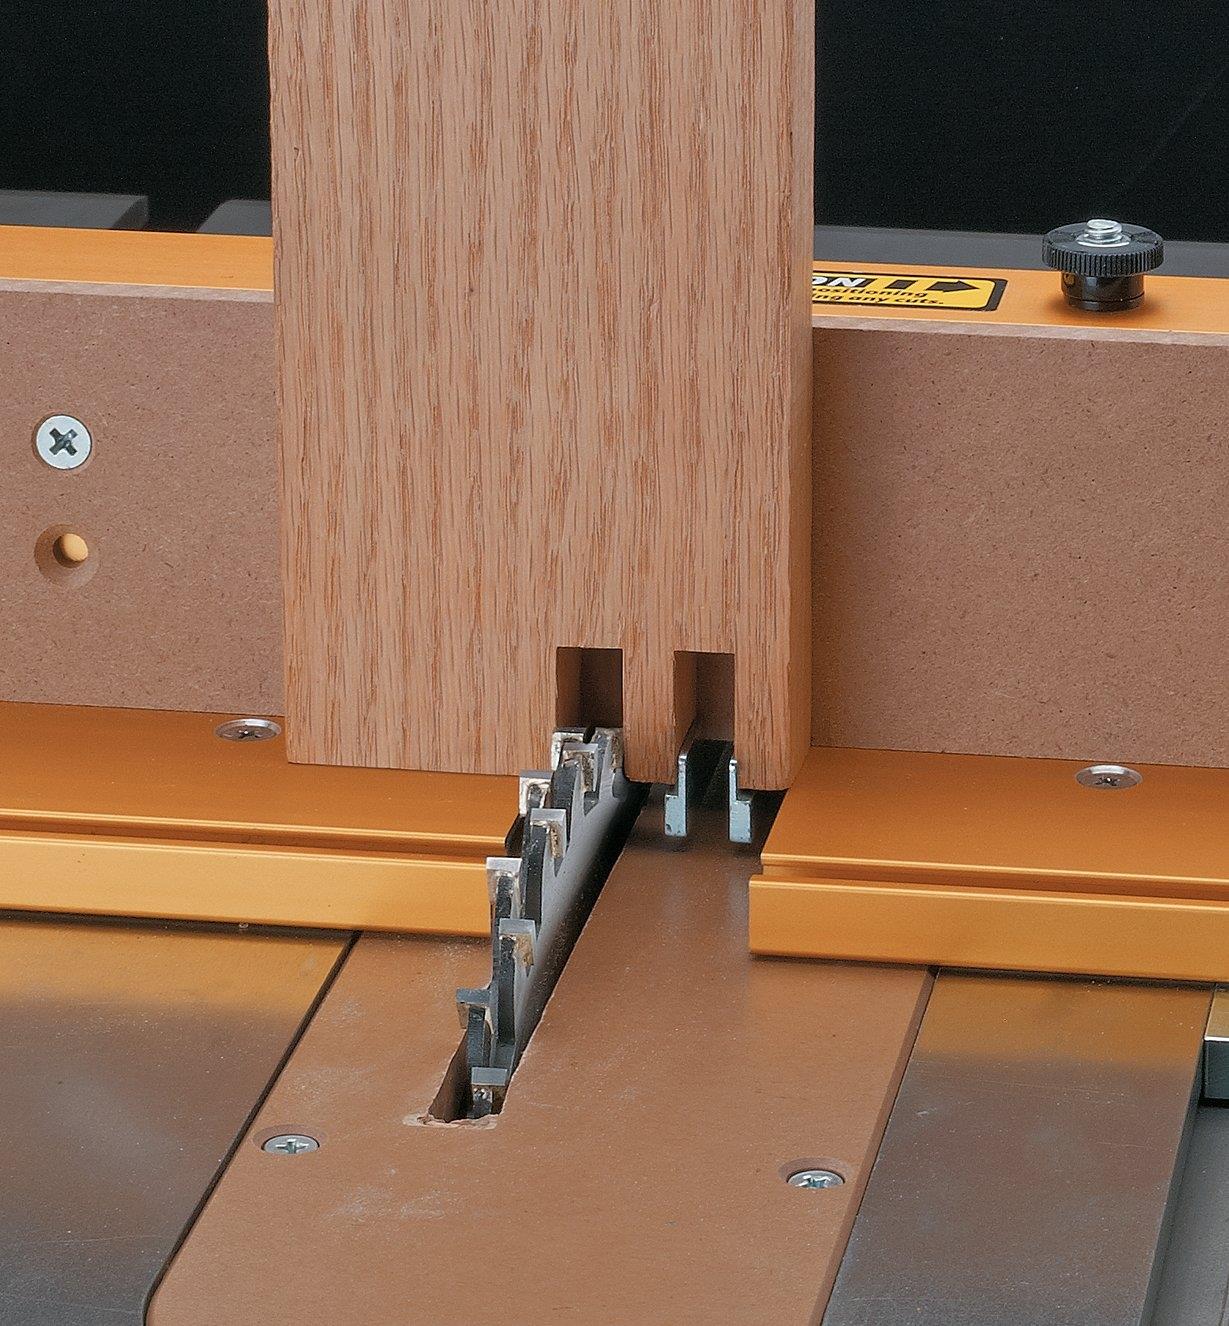 INCRA I-BOX Jig for Box Joints